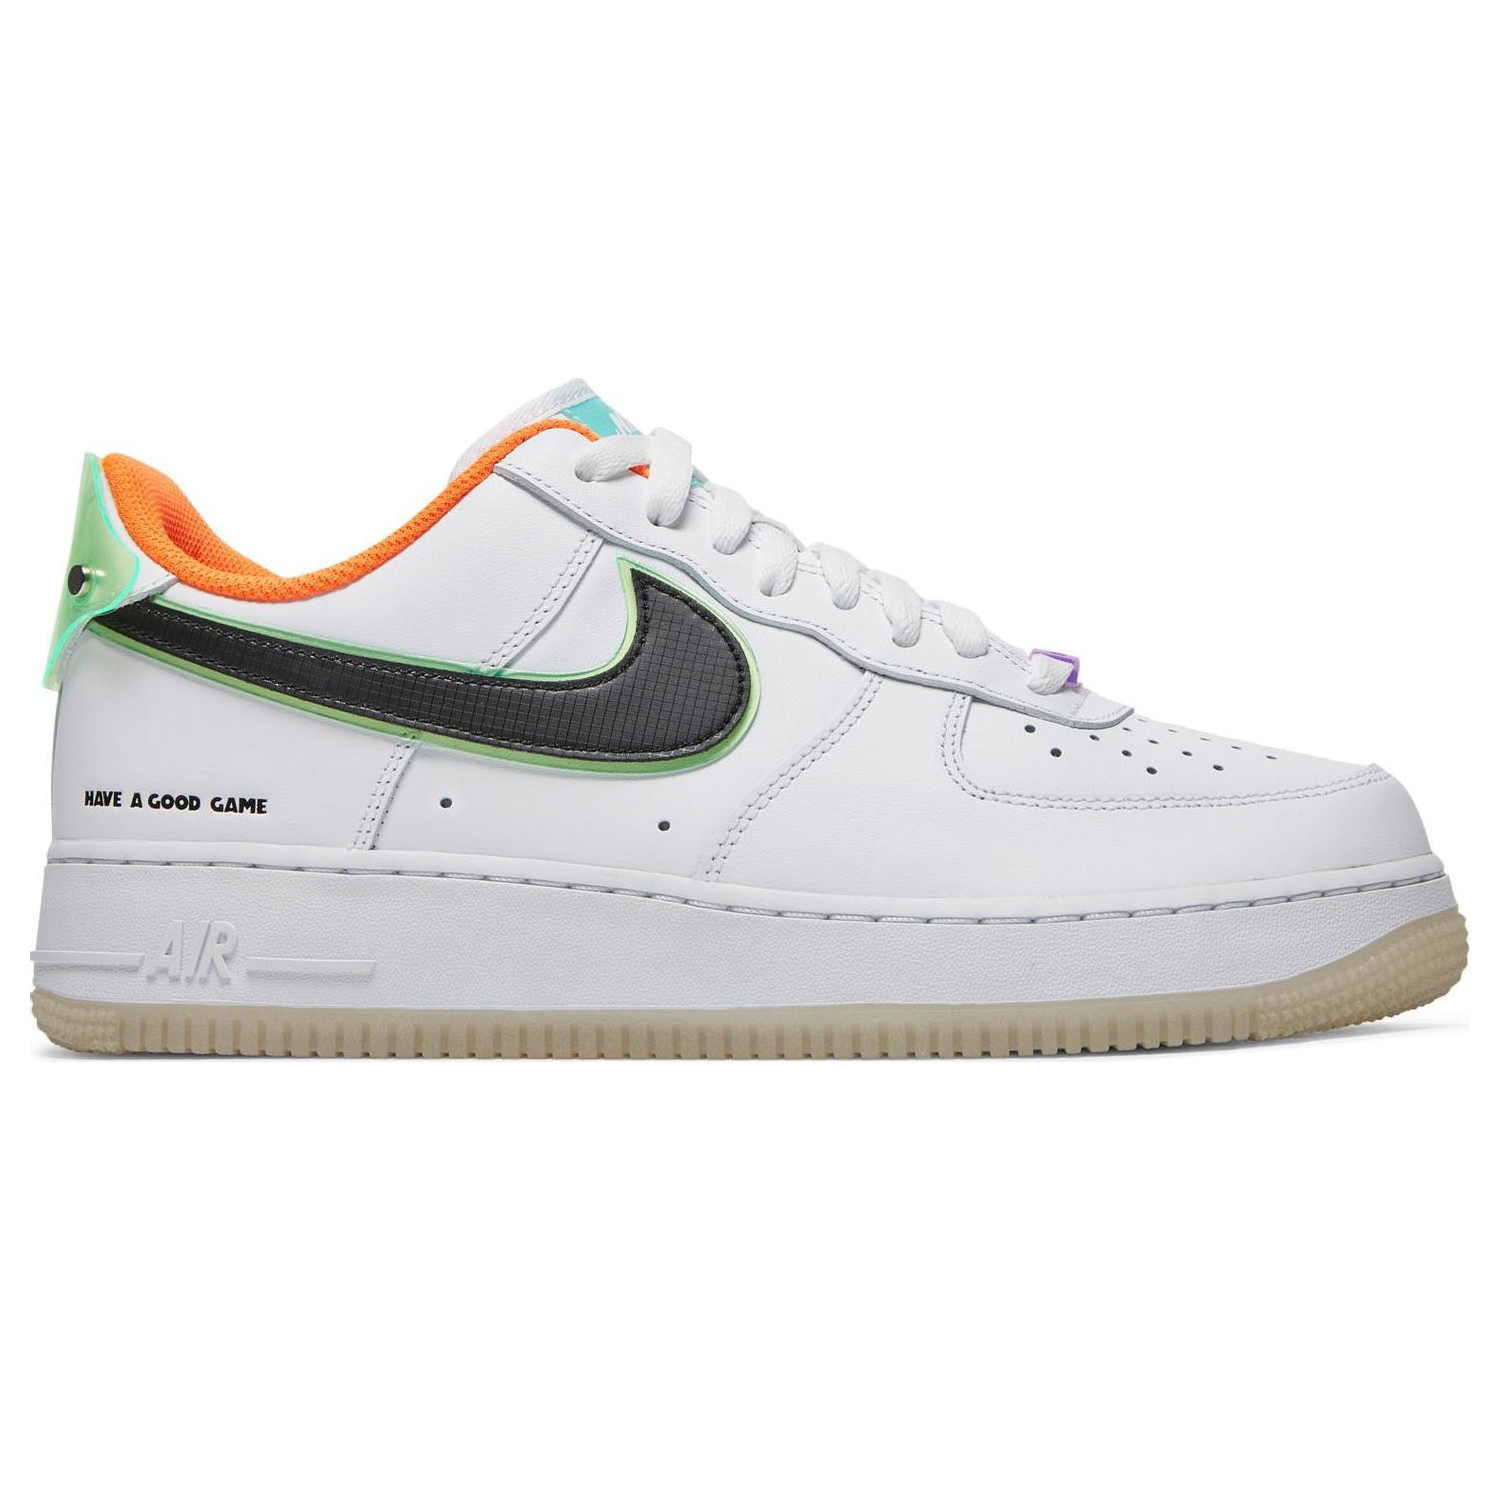 Кроссовки Nike Air Force 1 '07 LE 'Have A Good Game', белый